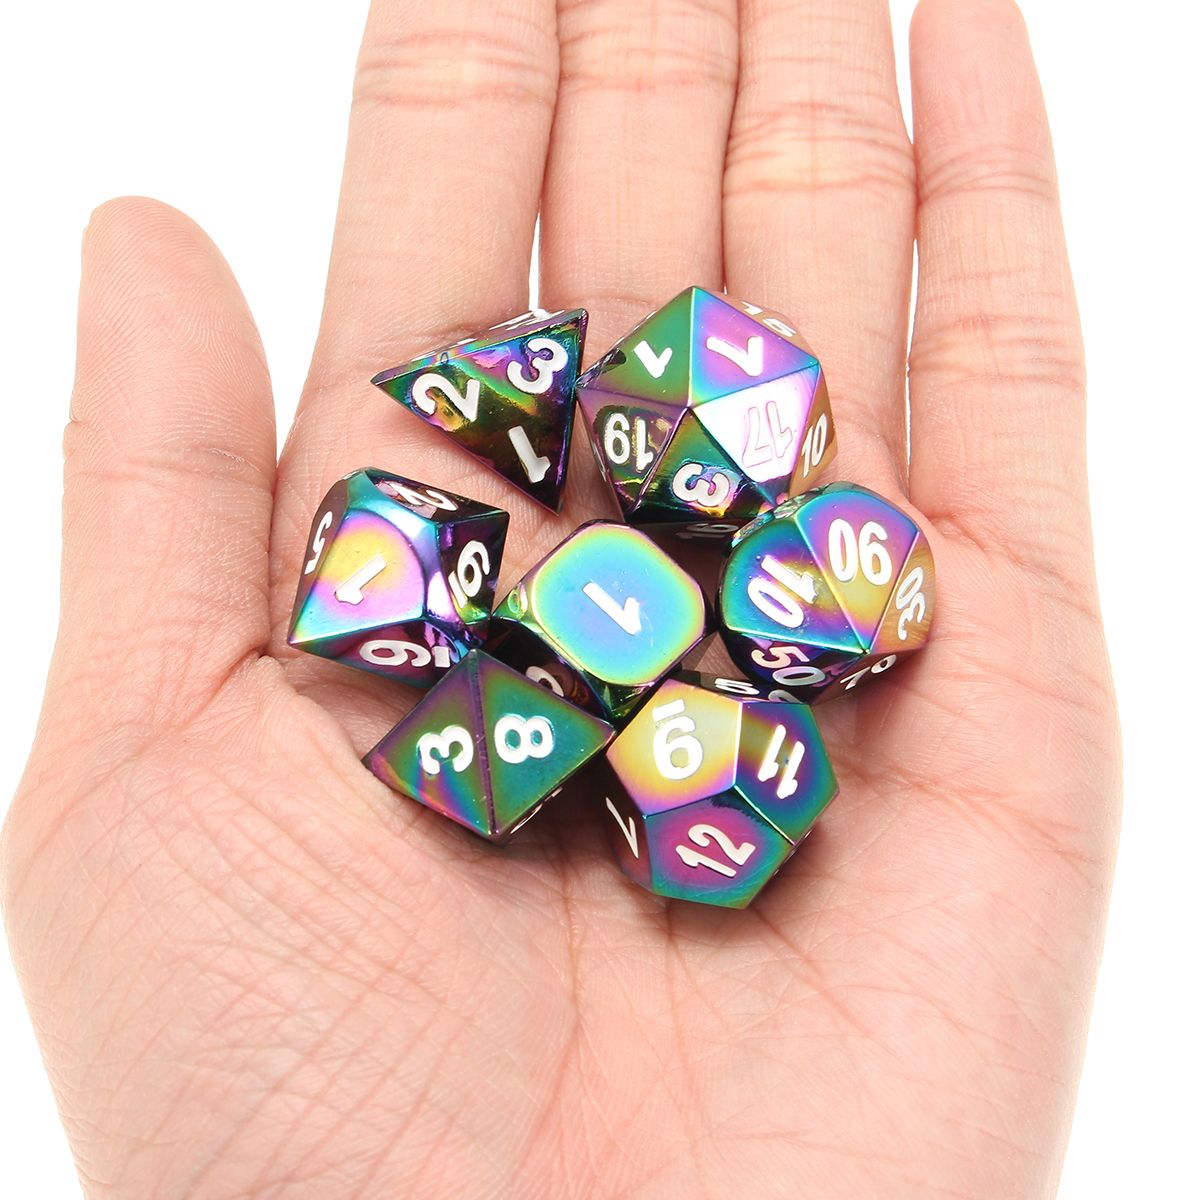 7Pcs-Colorful-Zinc-Alloy-Polyhedral-Dice-Set-Board-Game-Multisided-Dices-Gadget-1241484